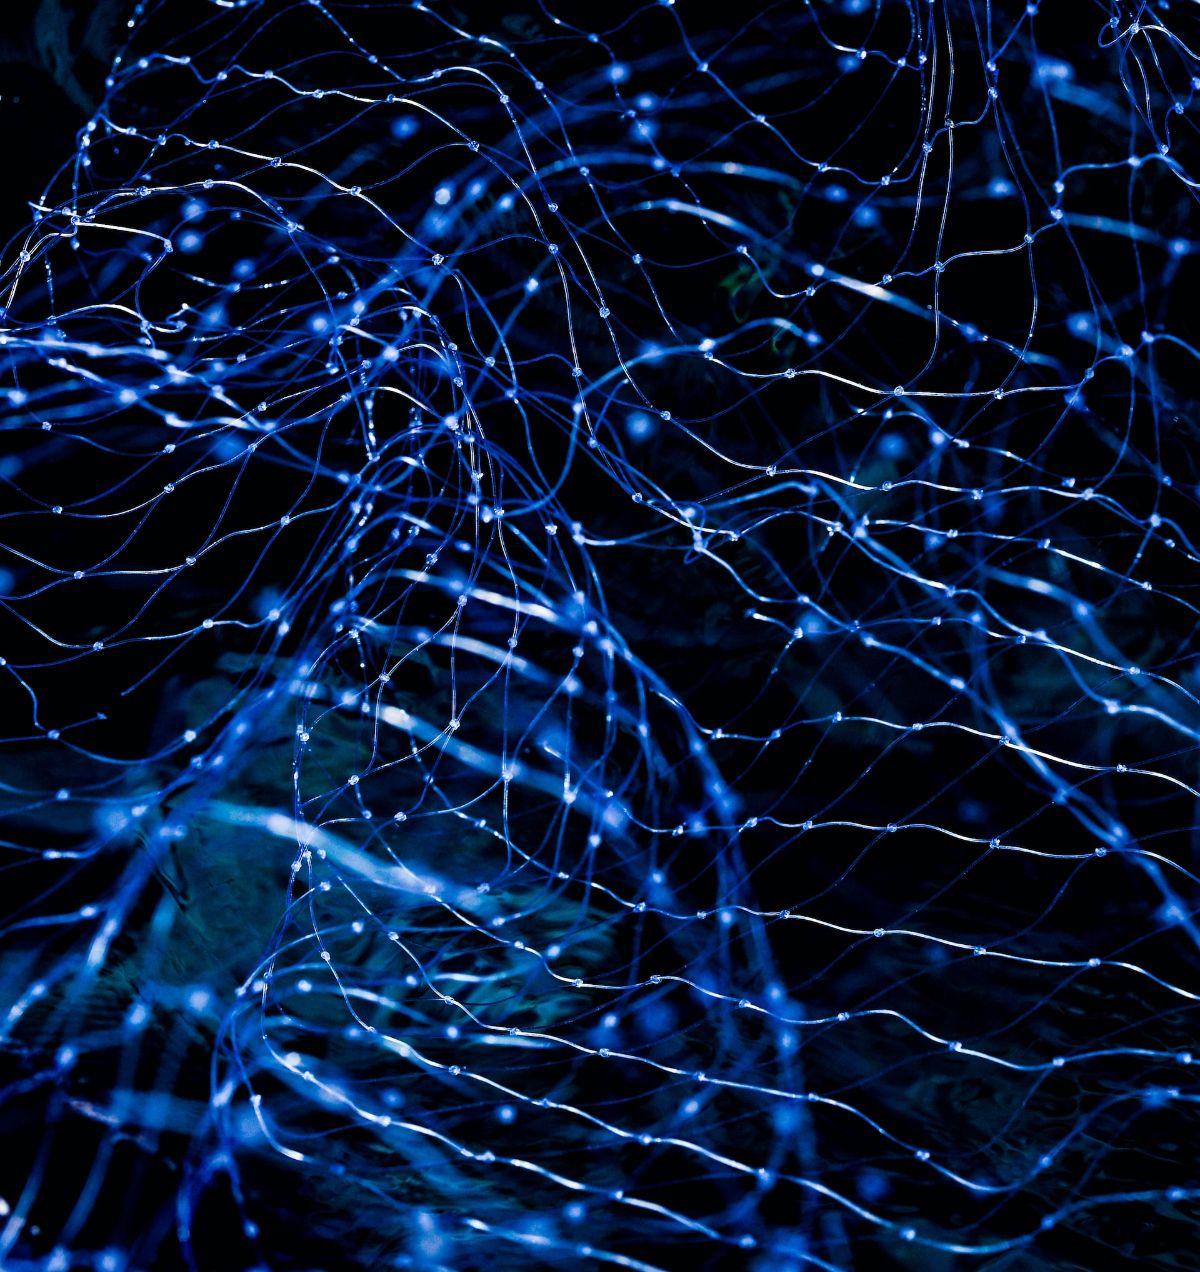 Bright abstract blue lines against a black background